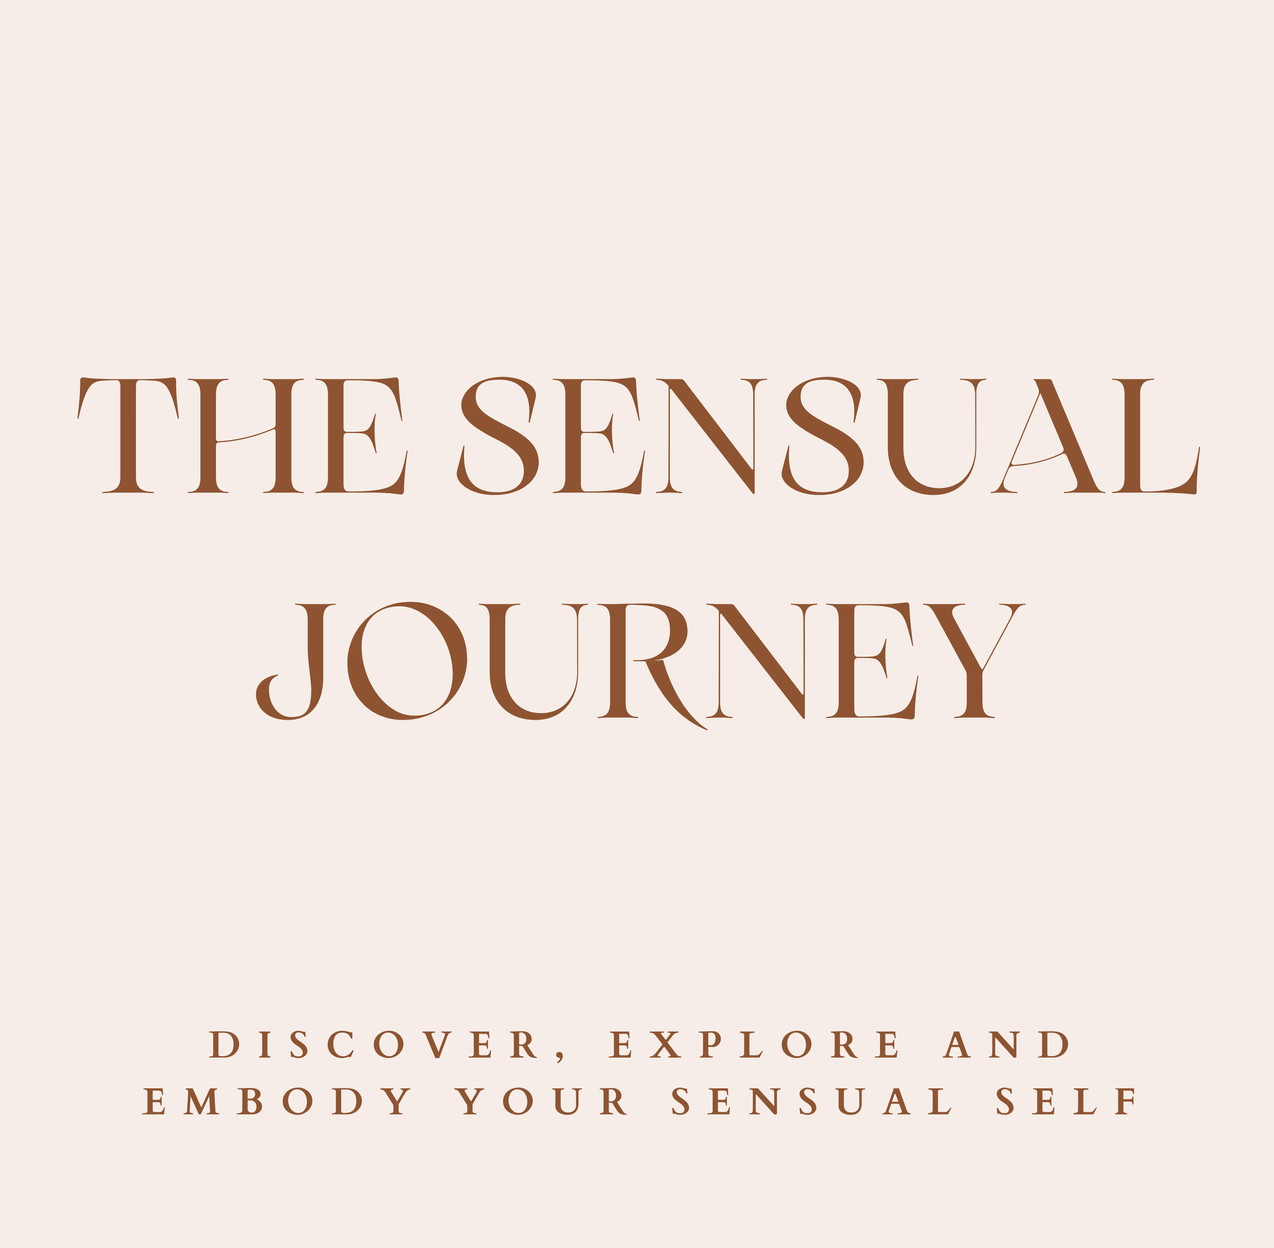 The sensual journey